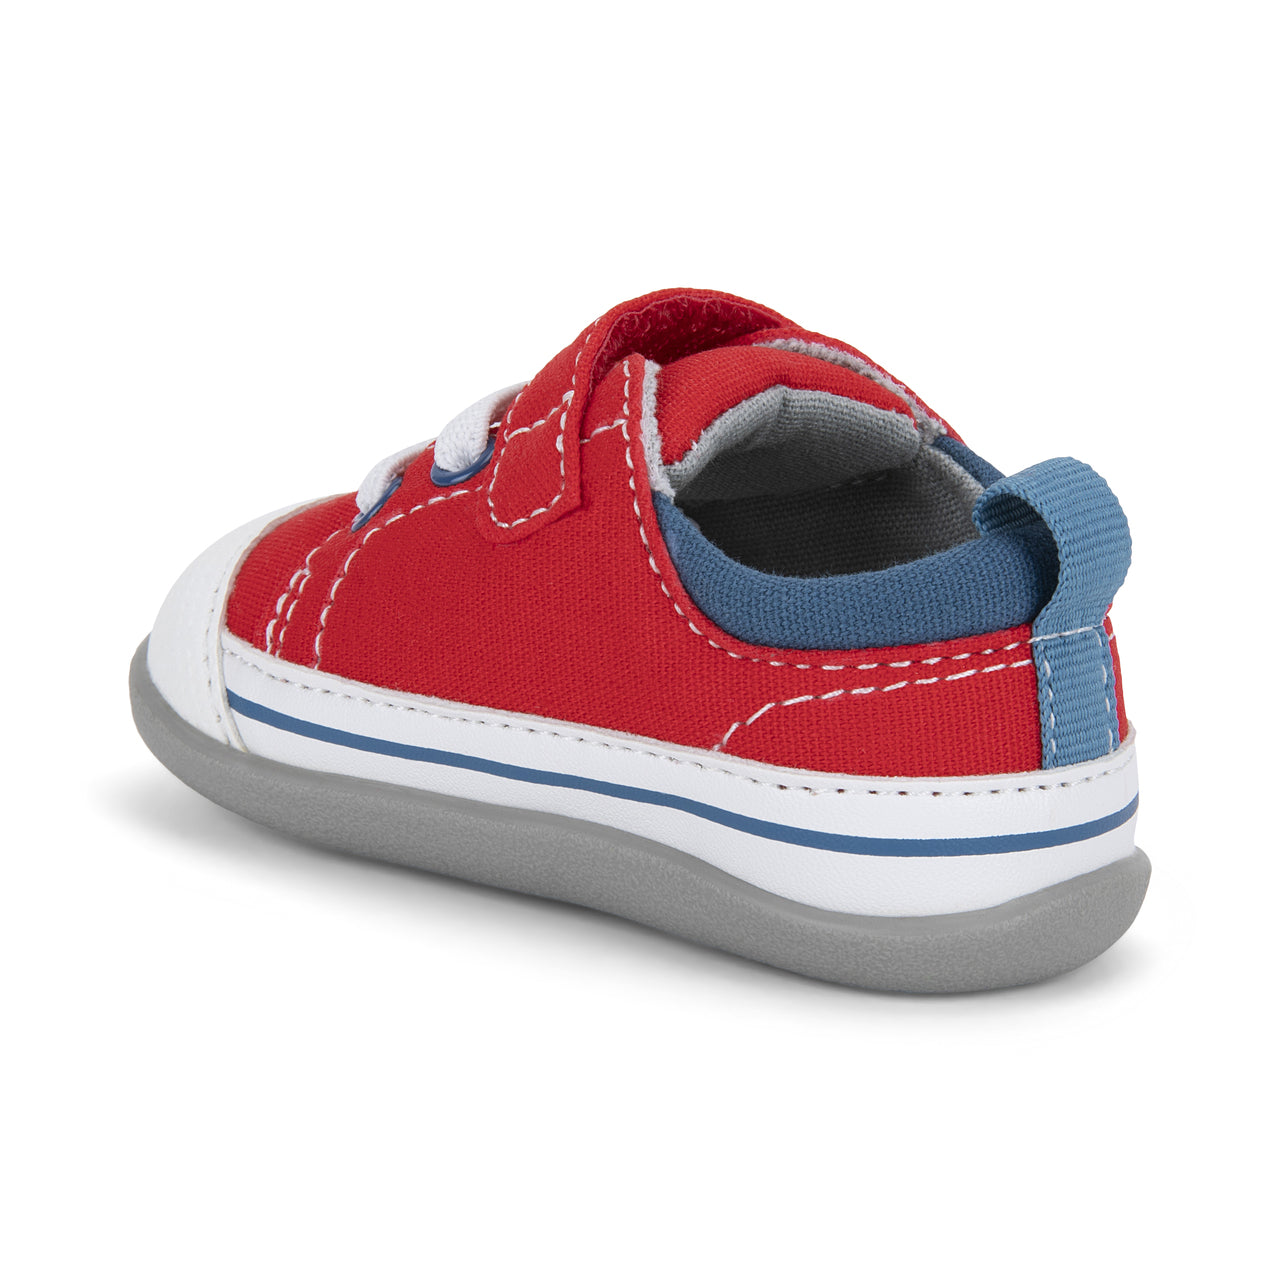 The flexible, lightweight engineering of this classic trainer makes it perfect for boys beginning to walk. The padded collar and tongue will keep feet feeling as good as they look.